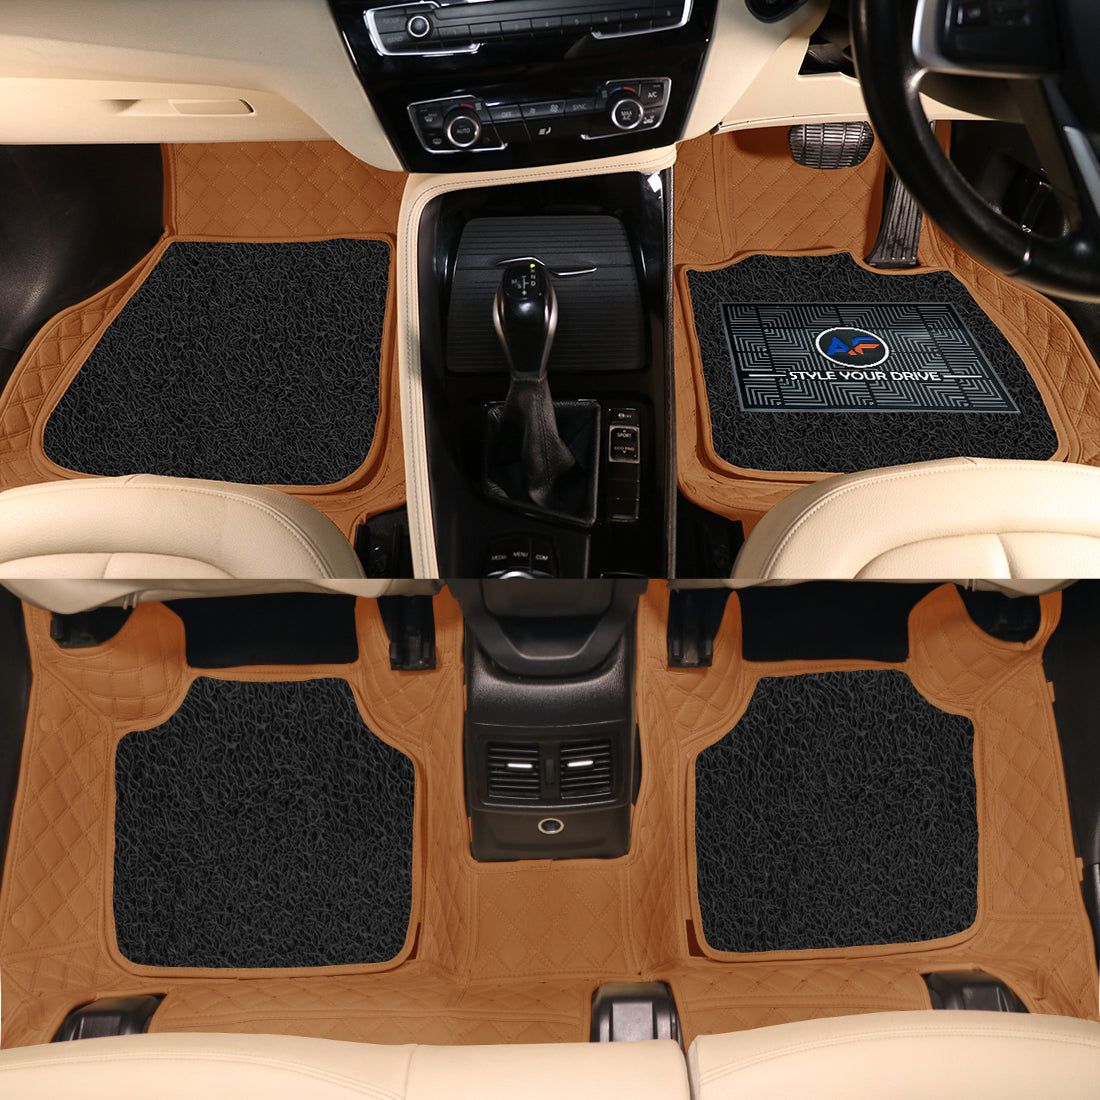 Porsche 718 Boxster 2019 7D Luxury Car Mat, All Weather Proof, Anti-Skid, 100% Waterproof & Odorless with Unique Diamond Fish Design (24mm Luxury PU Leather, 2 Rows)